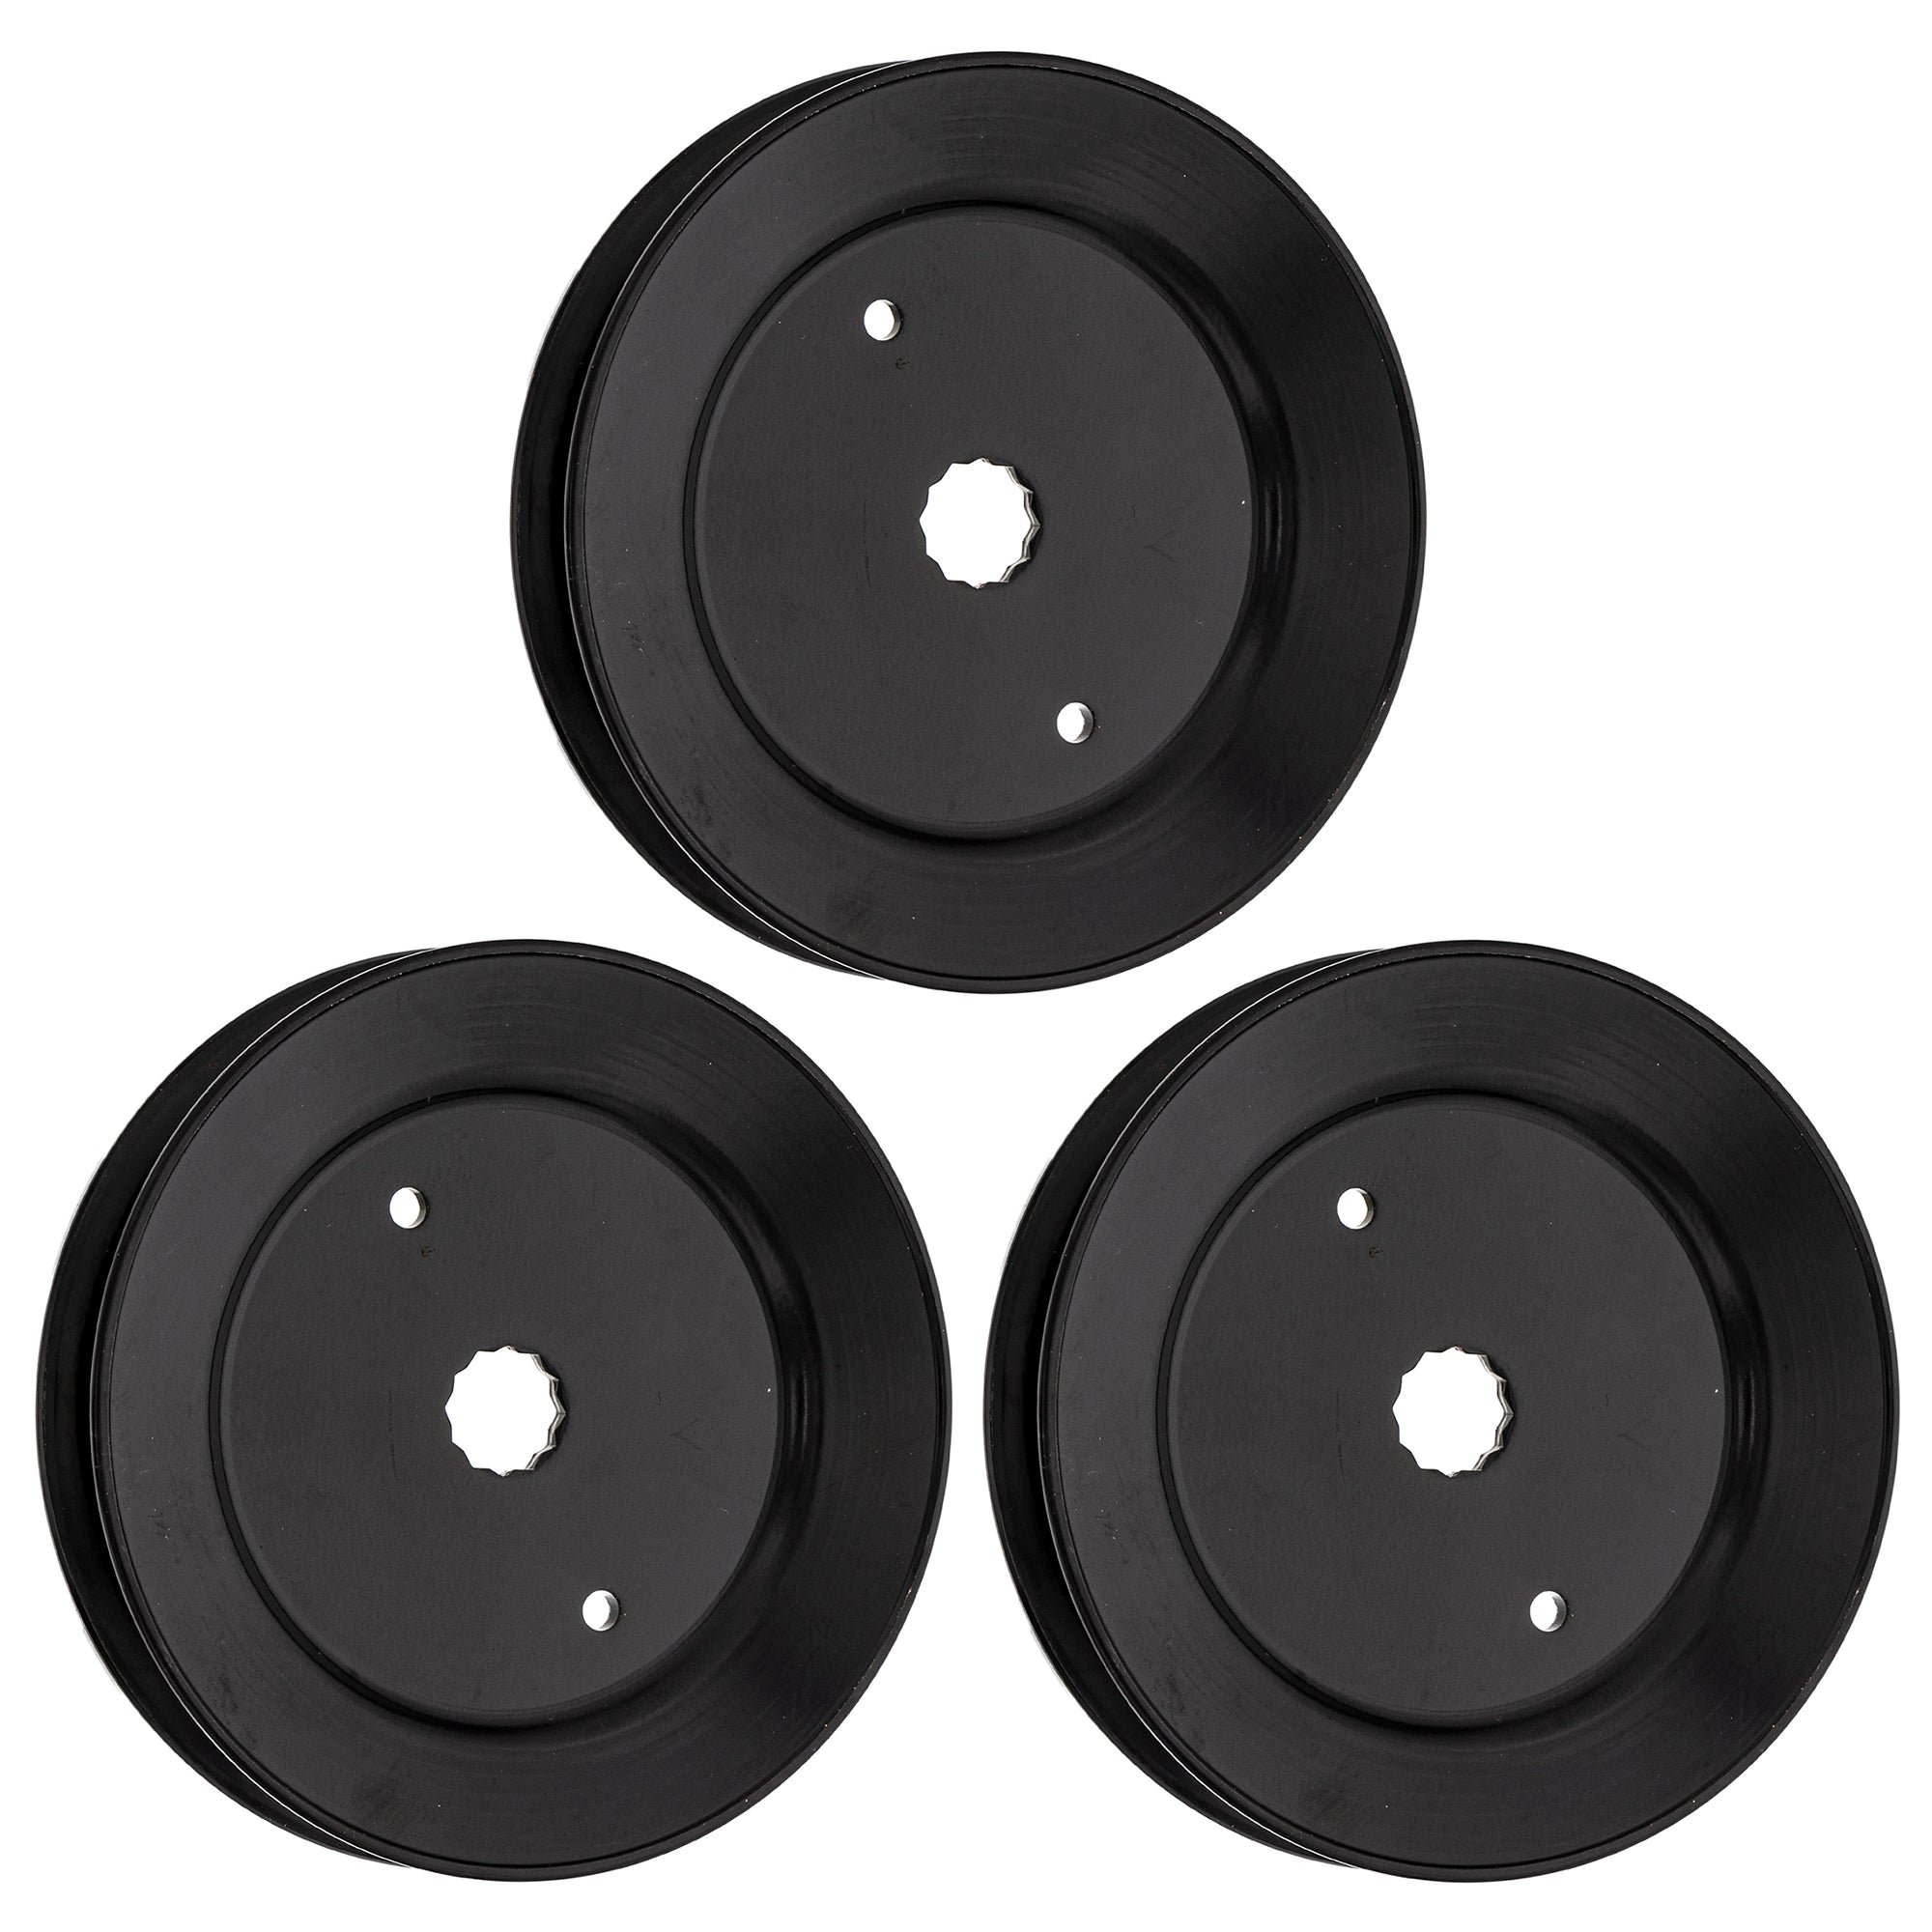 8TEN MK1000367 Deck Spindle & Pulley Kit for zOTHER Stens